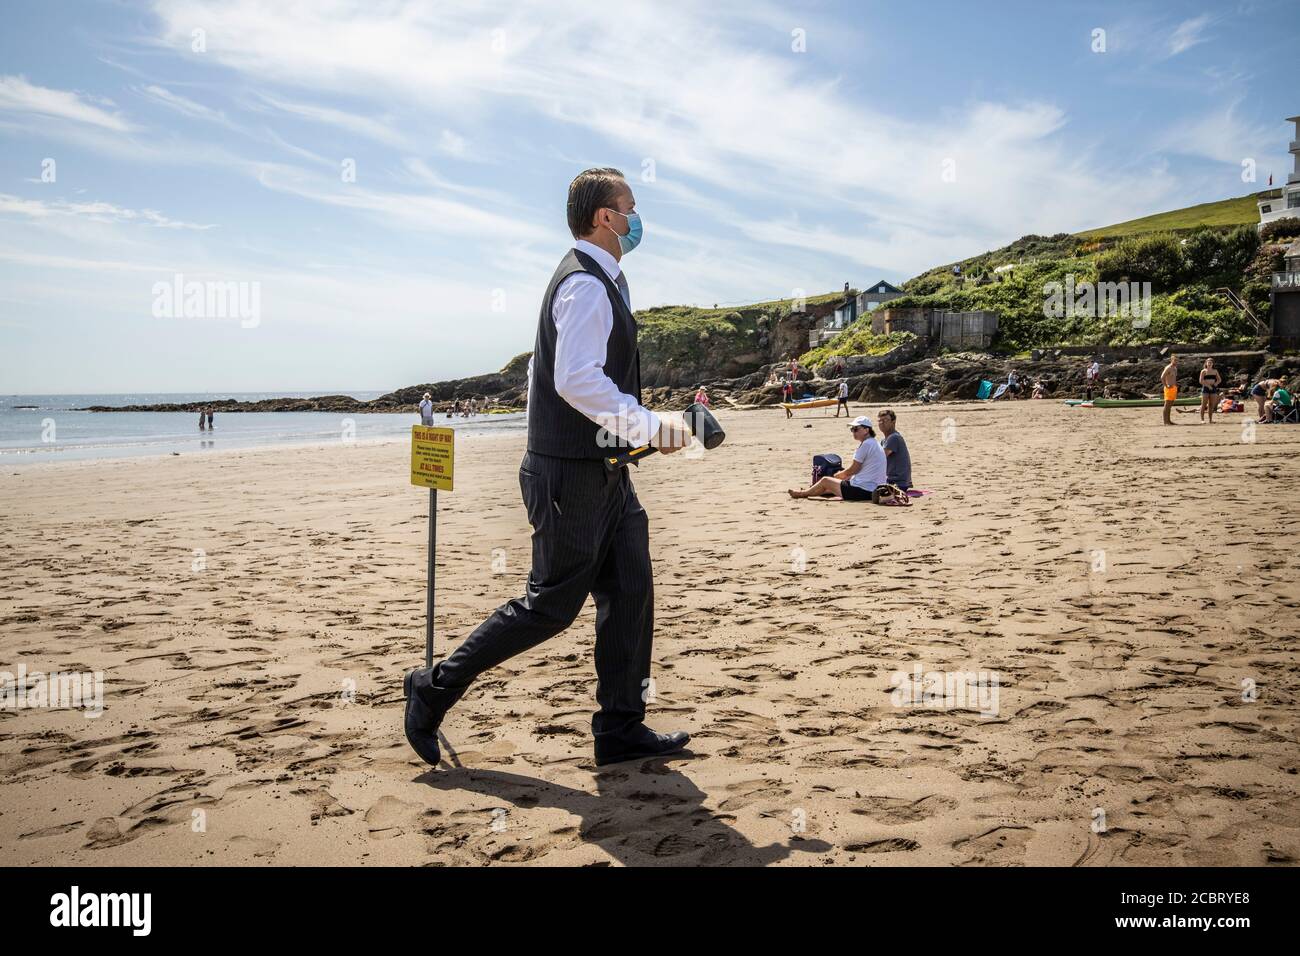 A hotel worker fom Burgh Island Hotel walks across the beach wearing  a protective face mask and suit as he marks out the service route acroos the bea Stock Photo